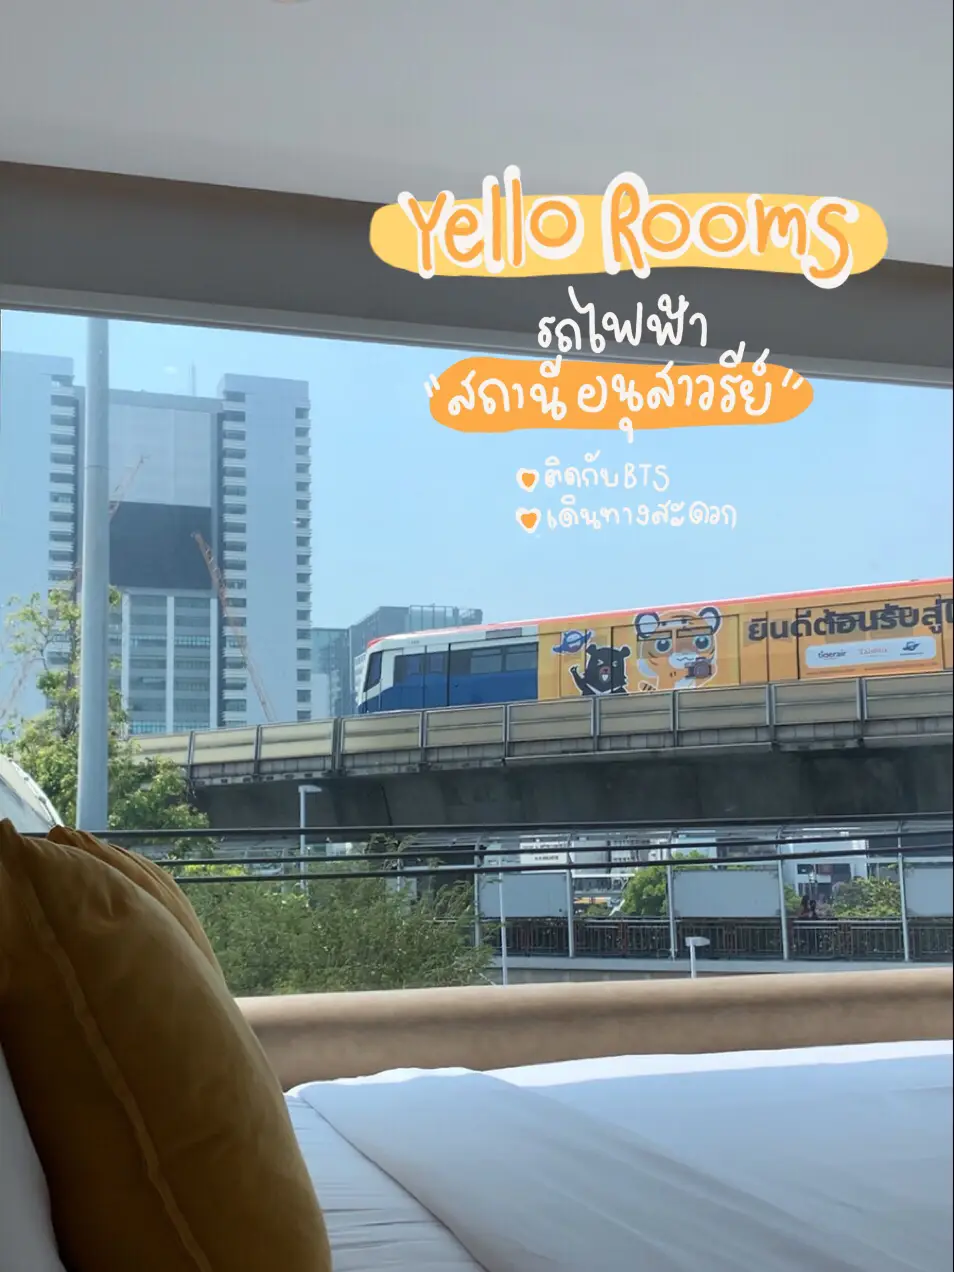 Come to sleep and watch the train YELLO ROOMS 💛 | Gallery posted